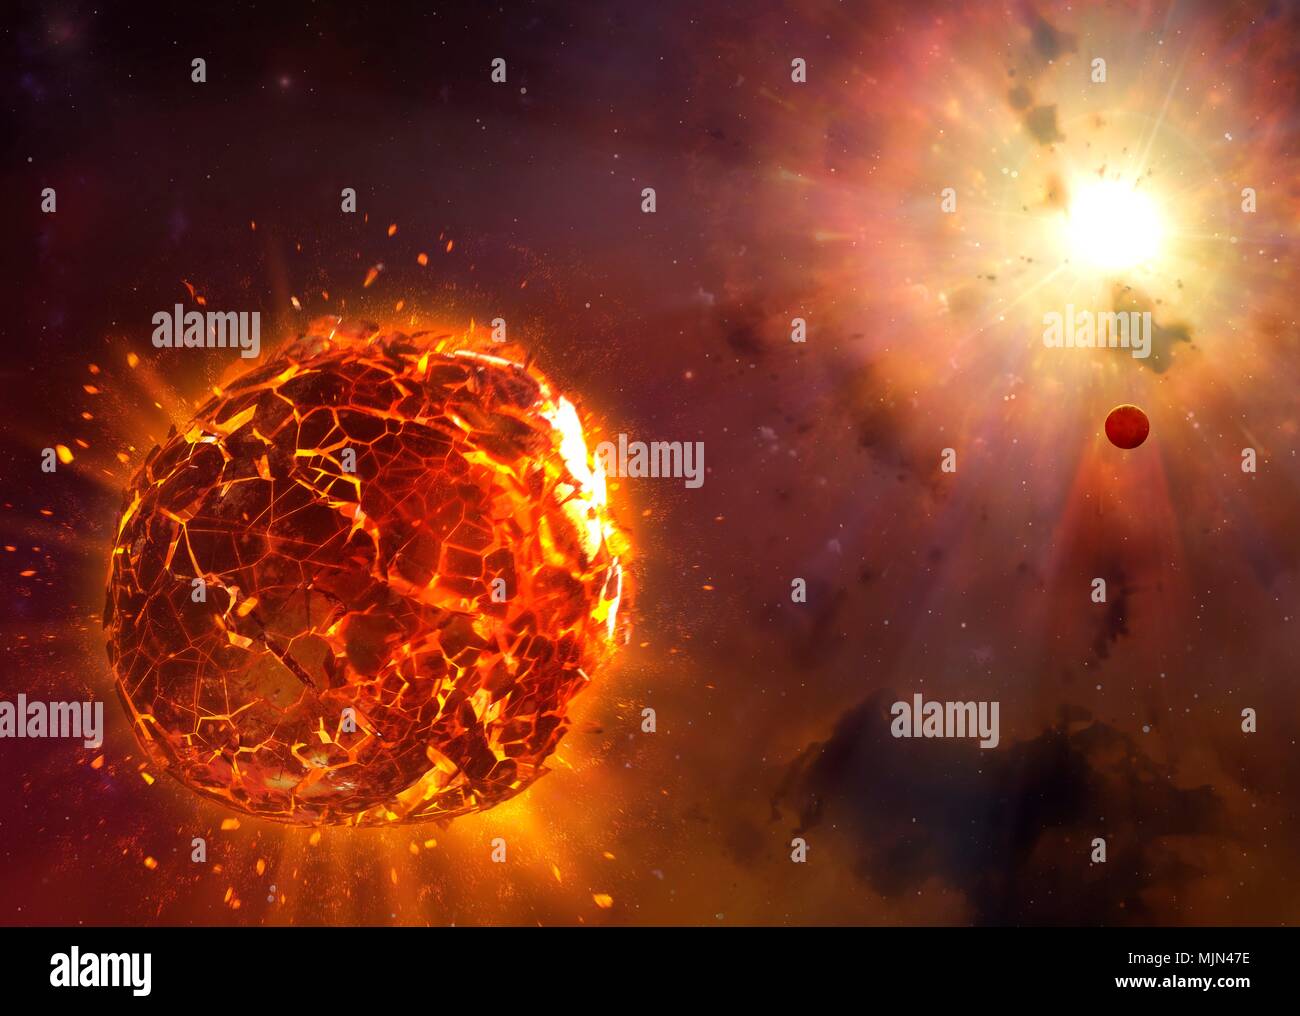 Supernova destroying planet, illustration. A rocky planet lies in the wake of its star, which has just gone supernova. The explosion shatters the planet. Stock Photo